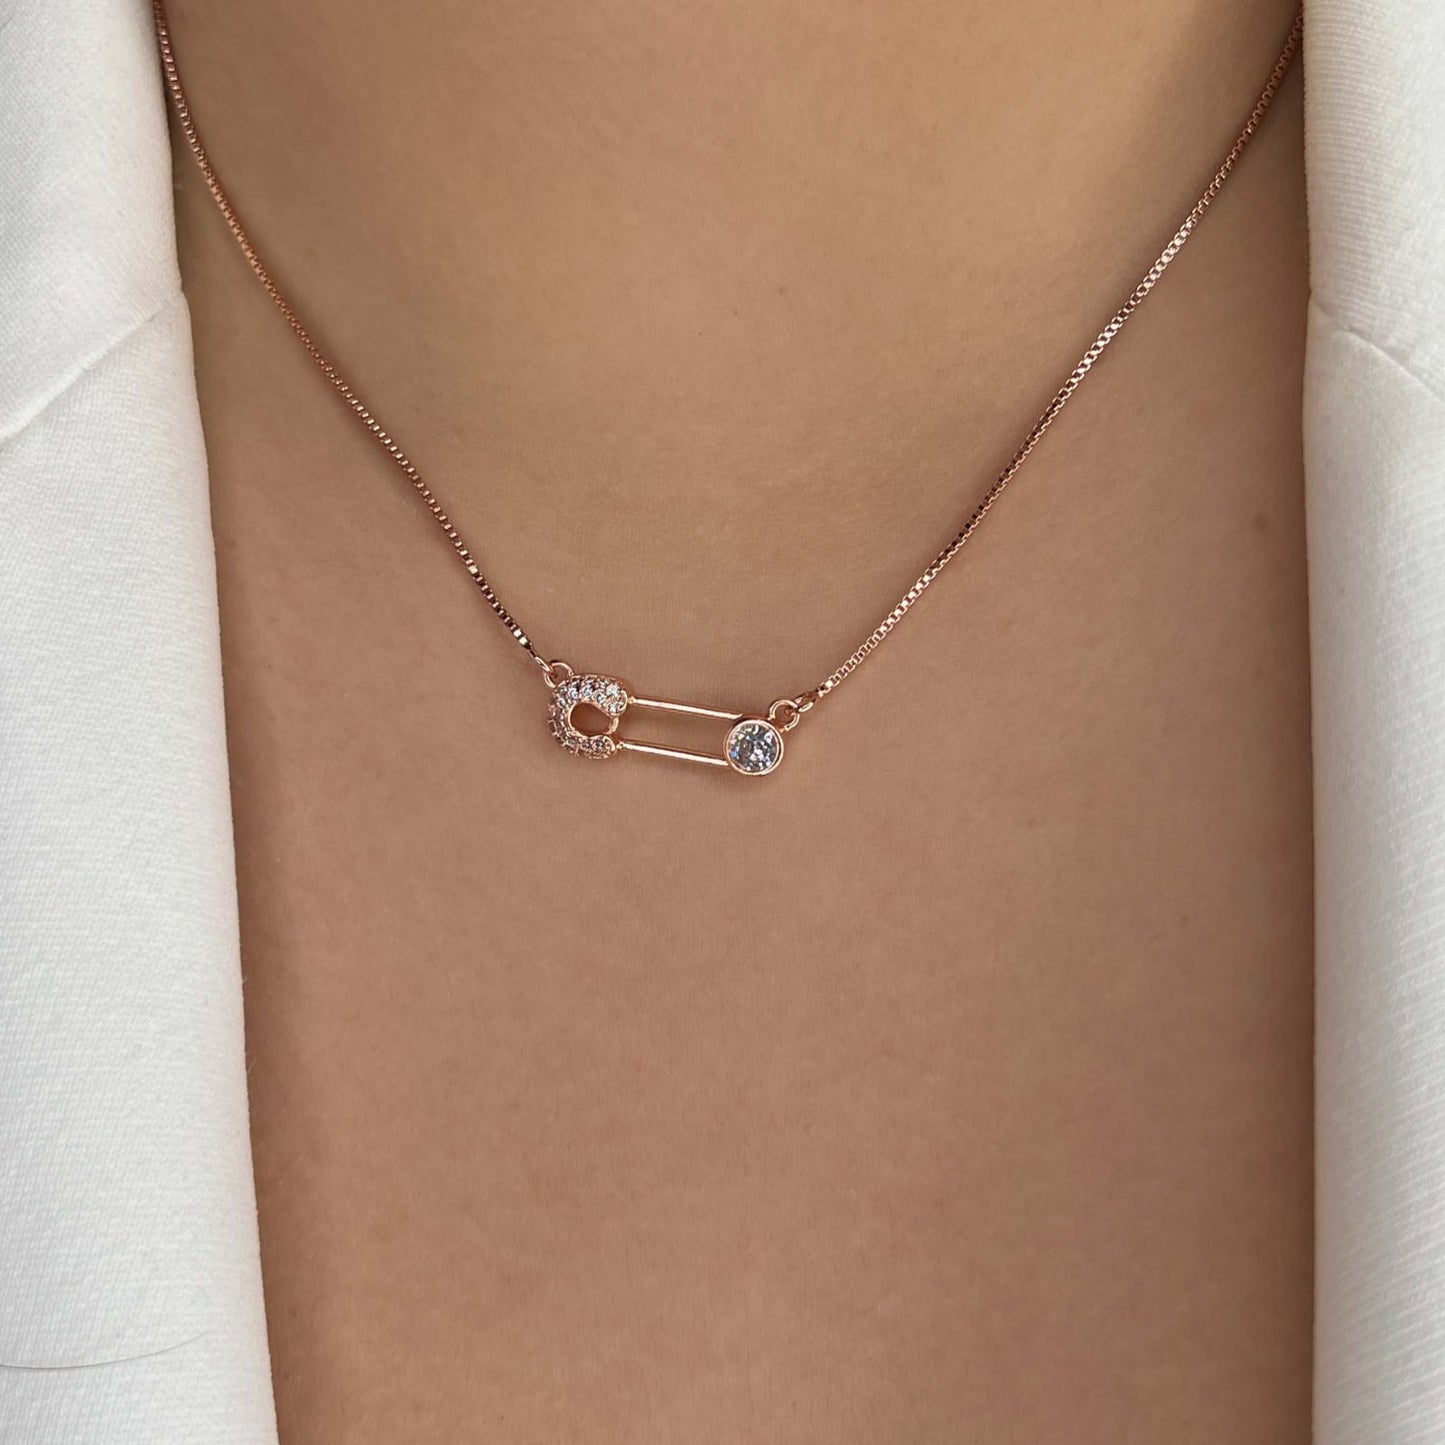 Safety Pin Necklace (1119)